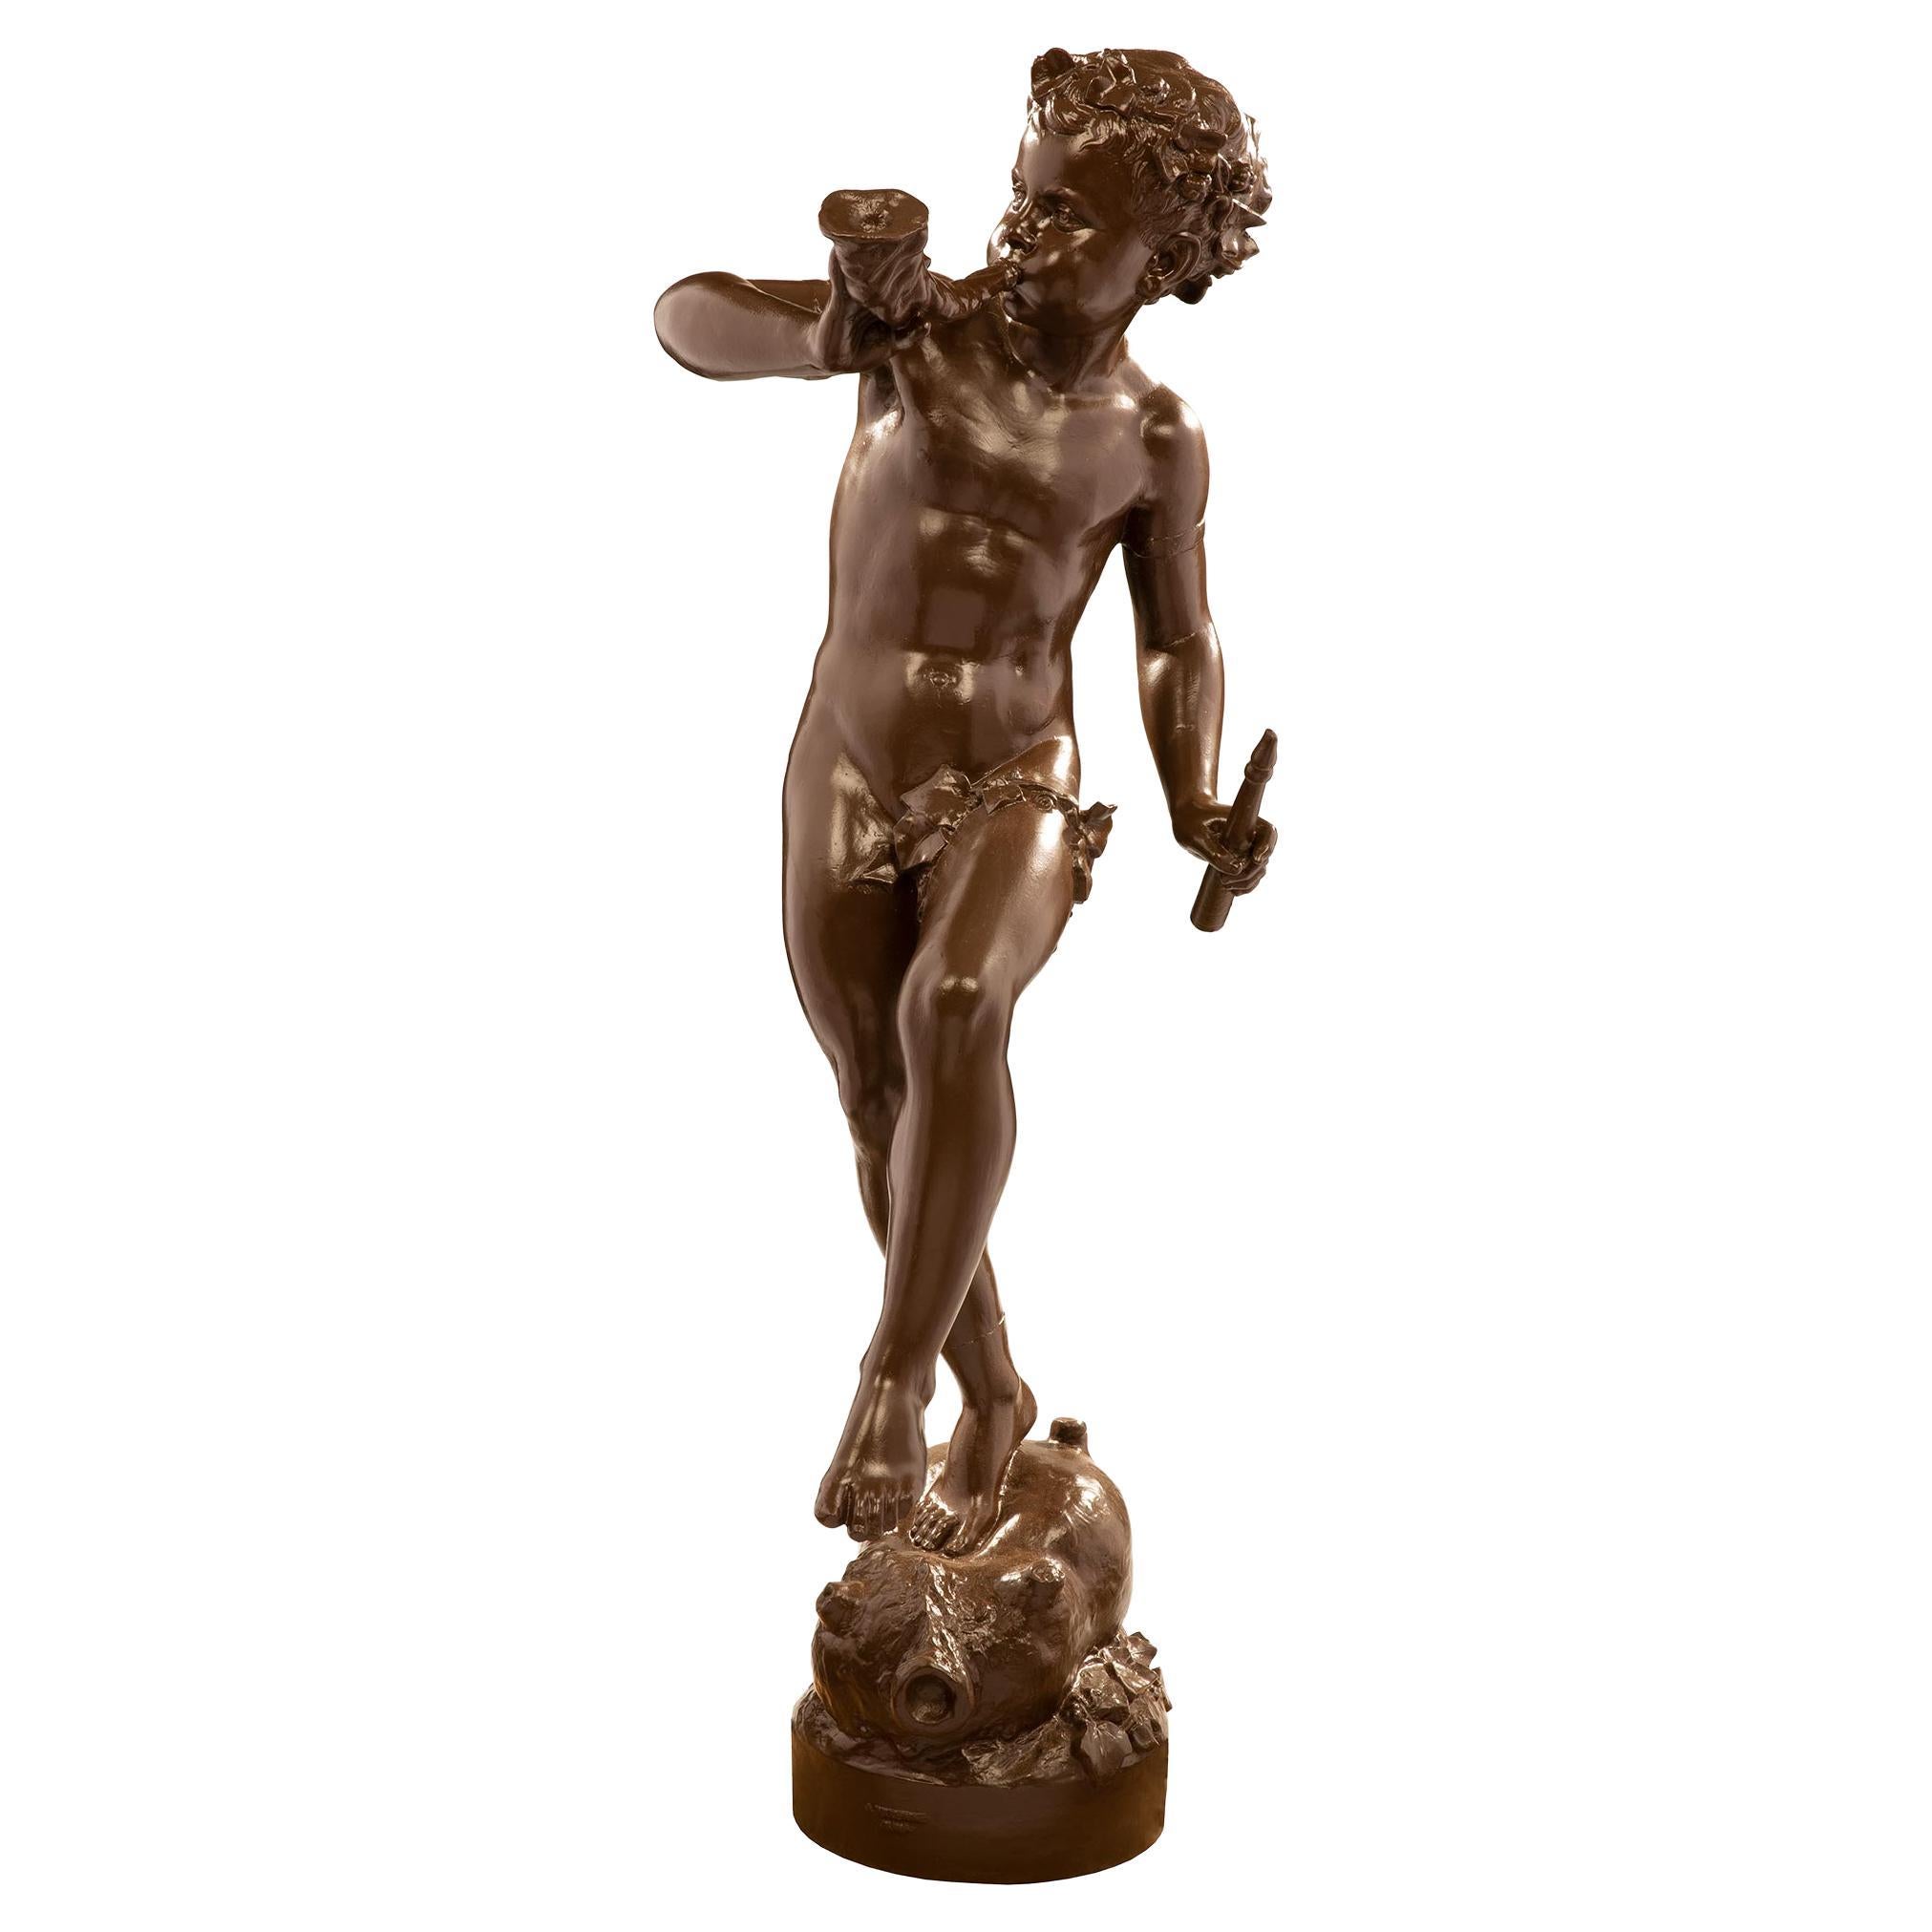 French 19th Century Cast Iron Statue of a Young Boy, Signed ‘A. DURENNE, Paris’